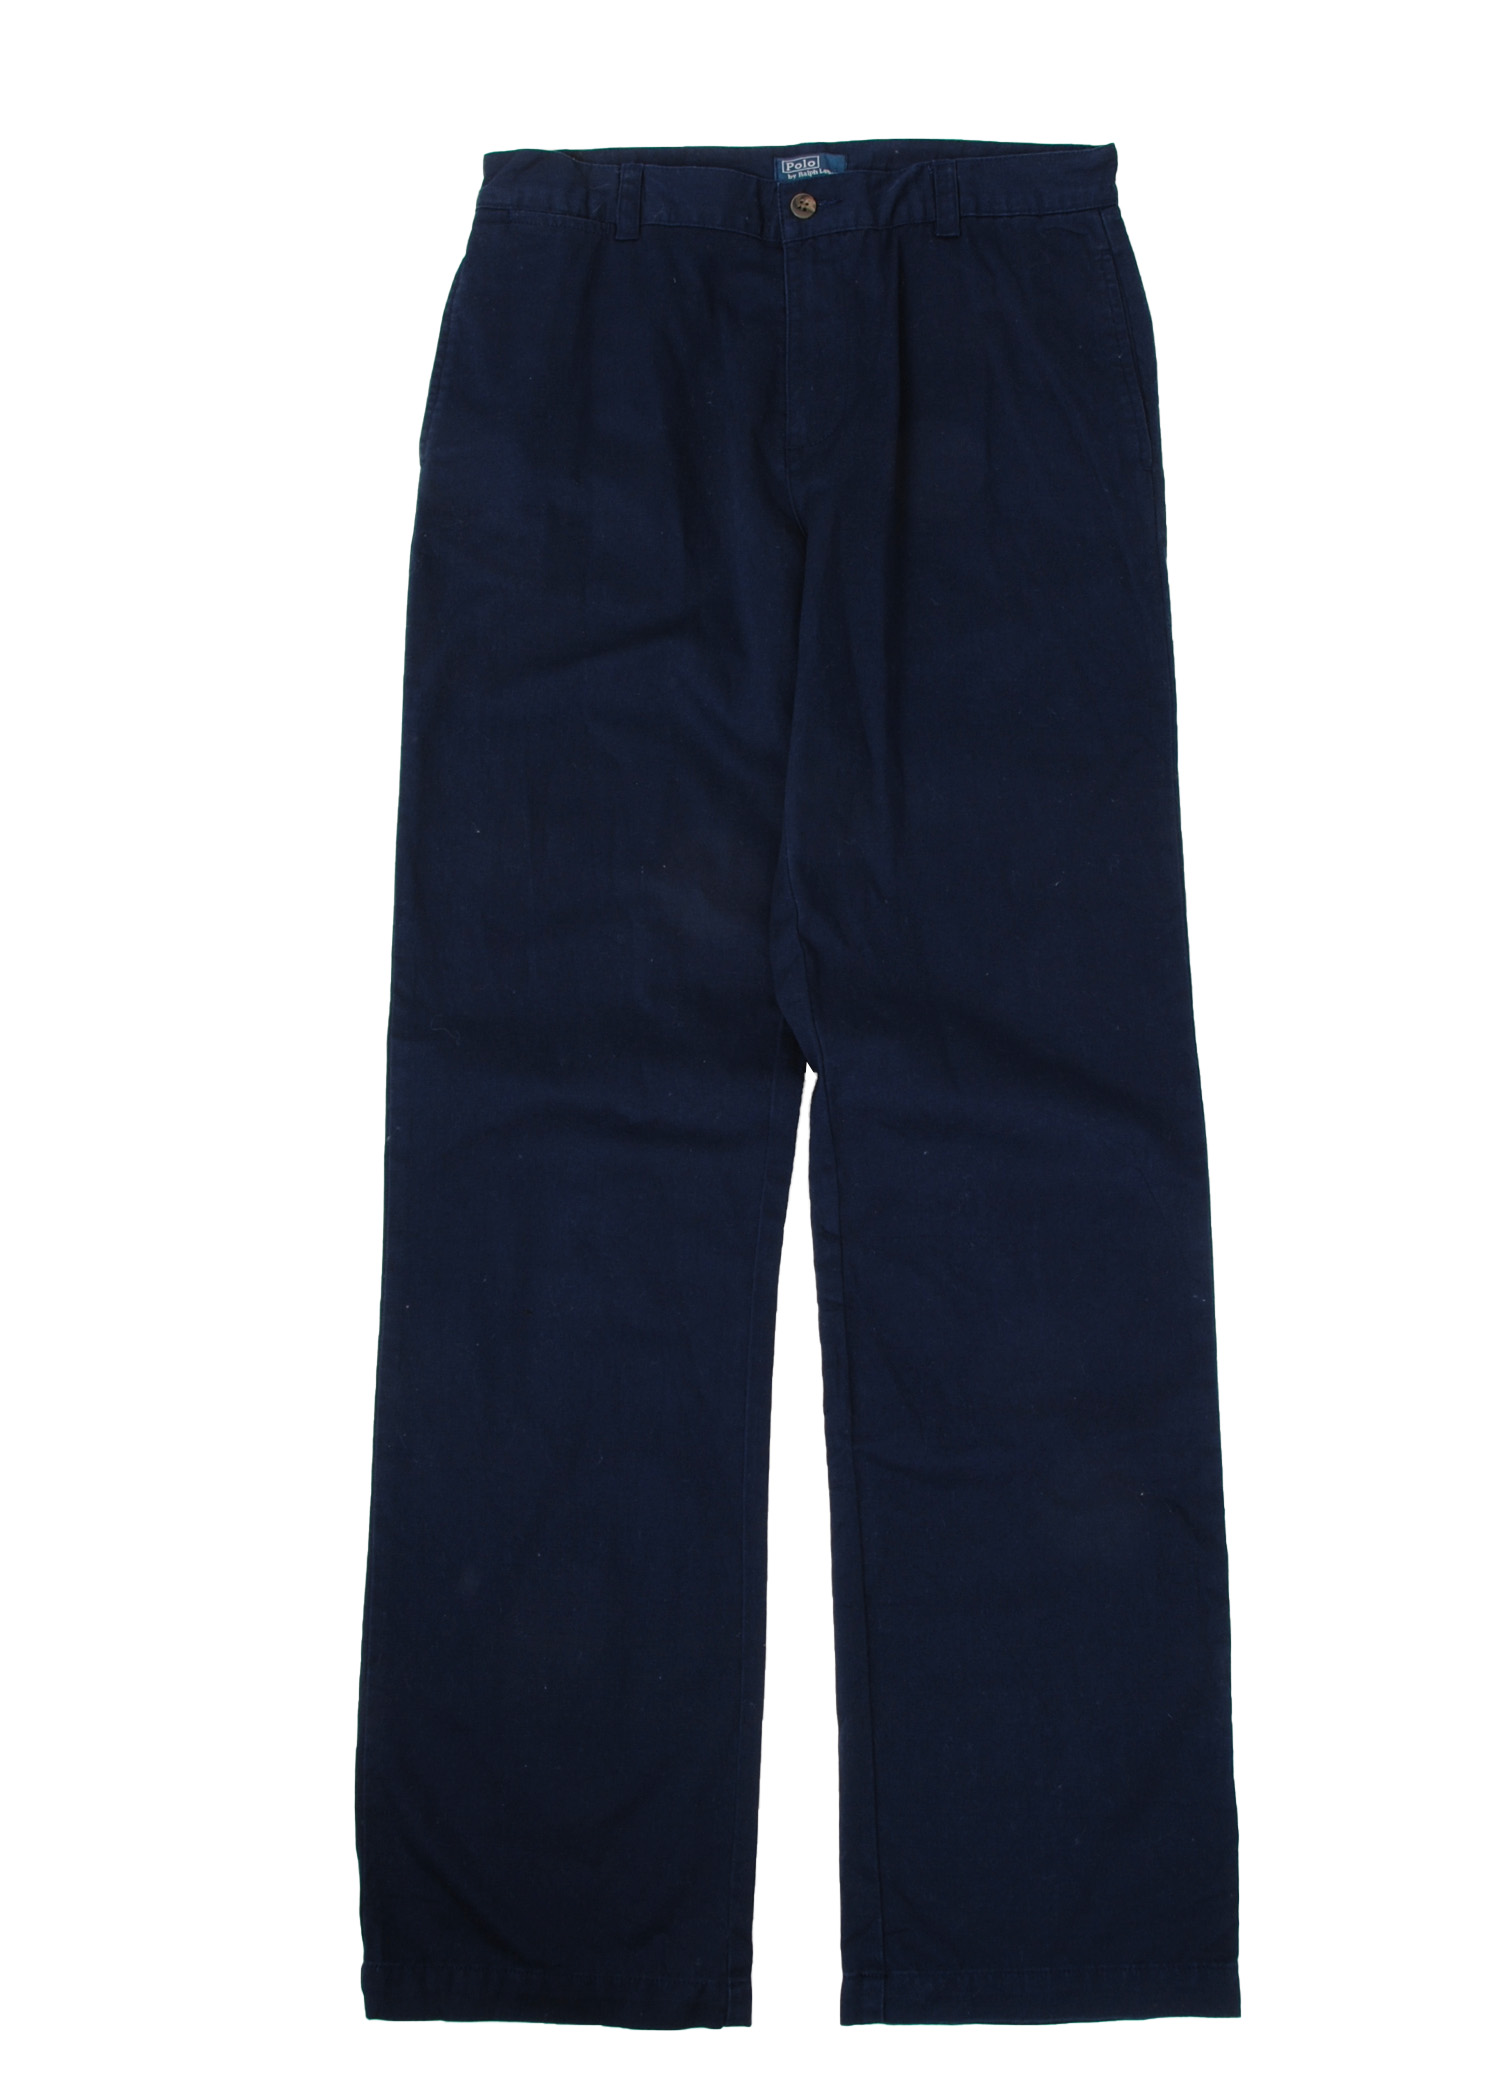 Polo by Ralph Lauren chino pants